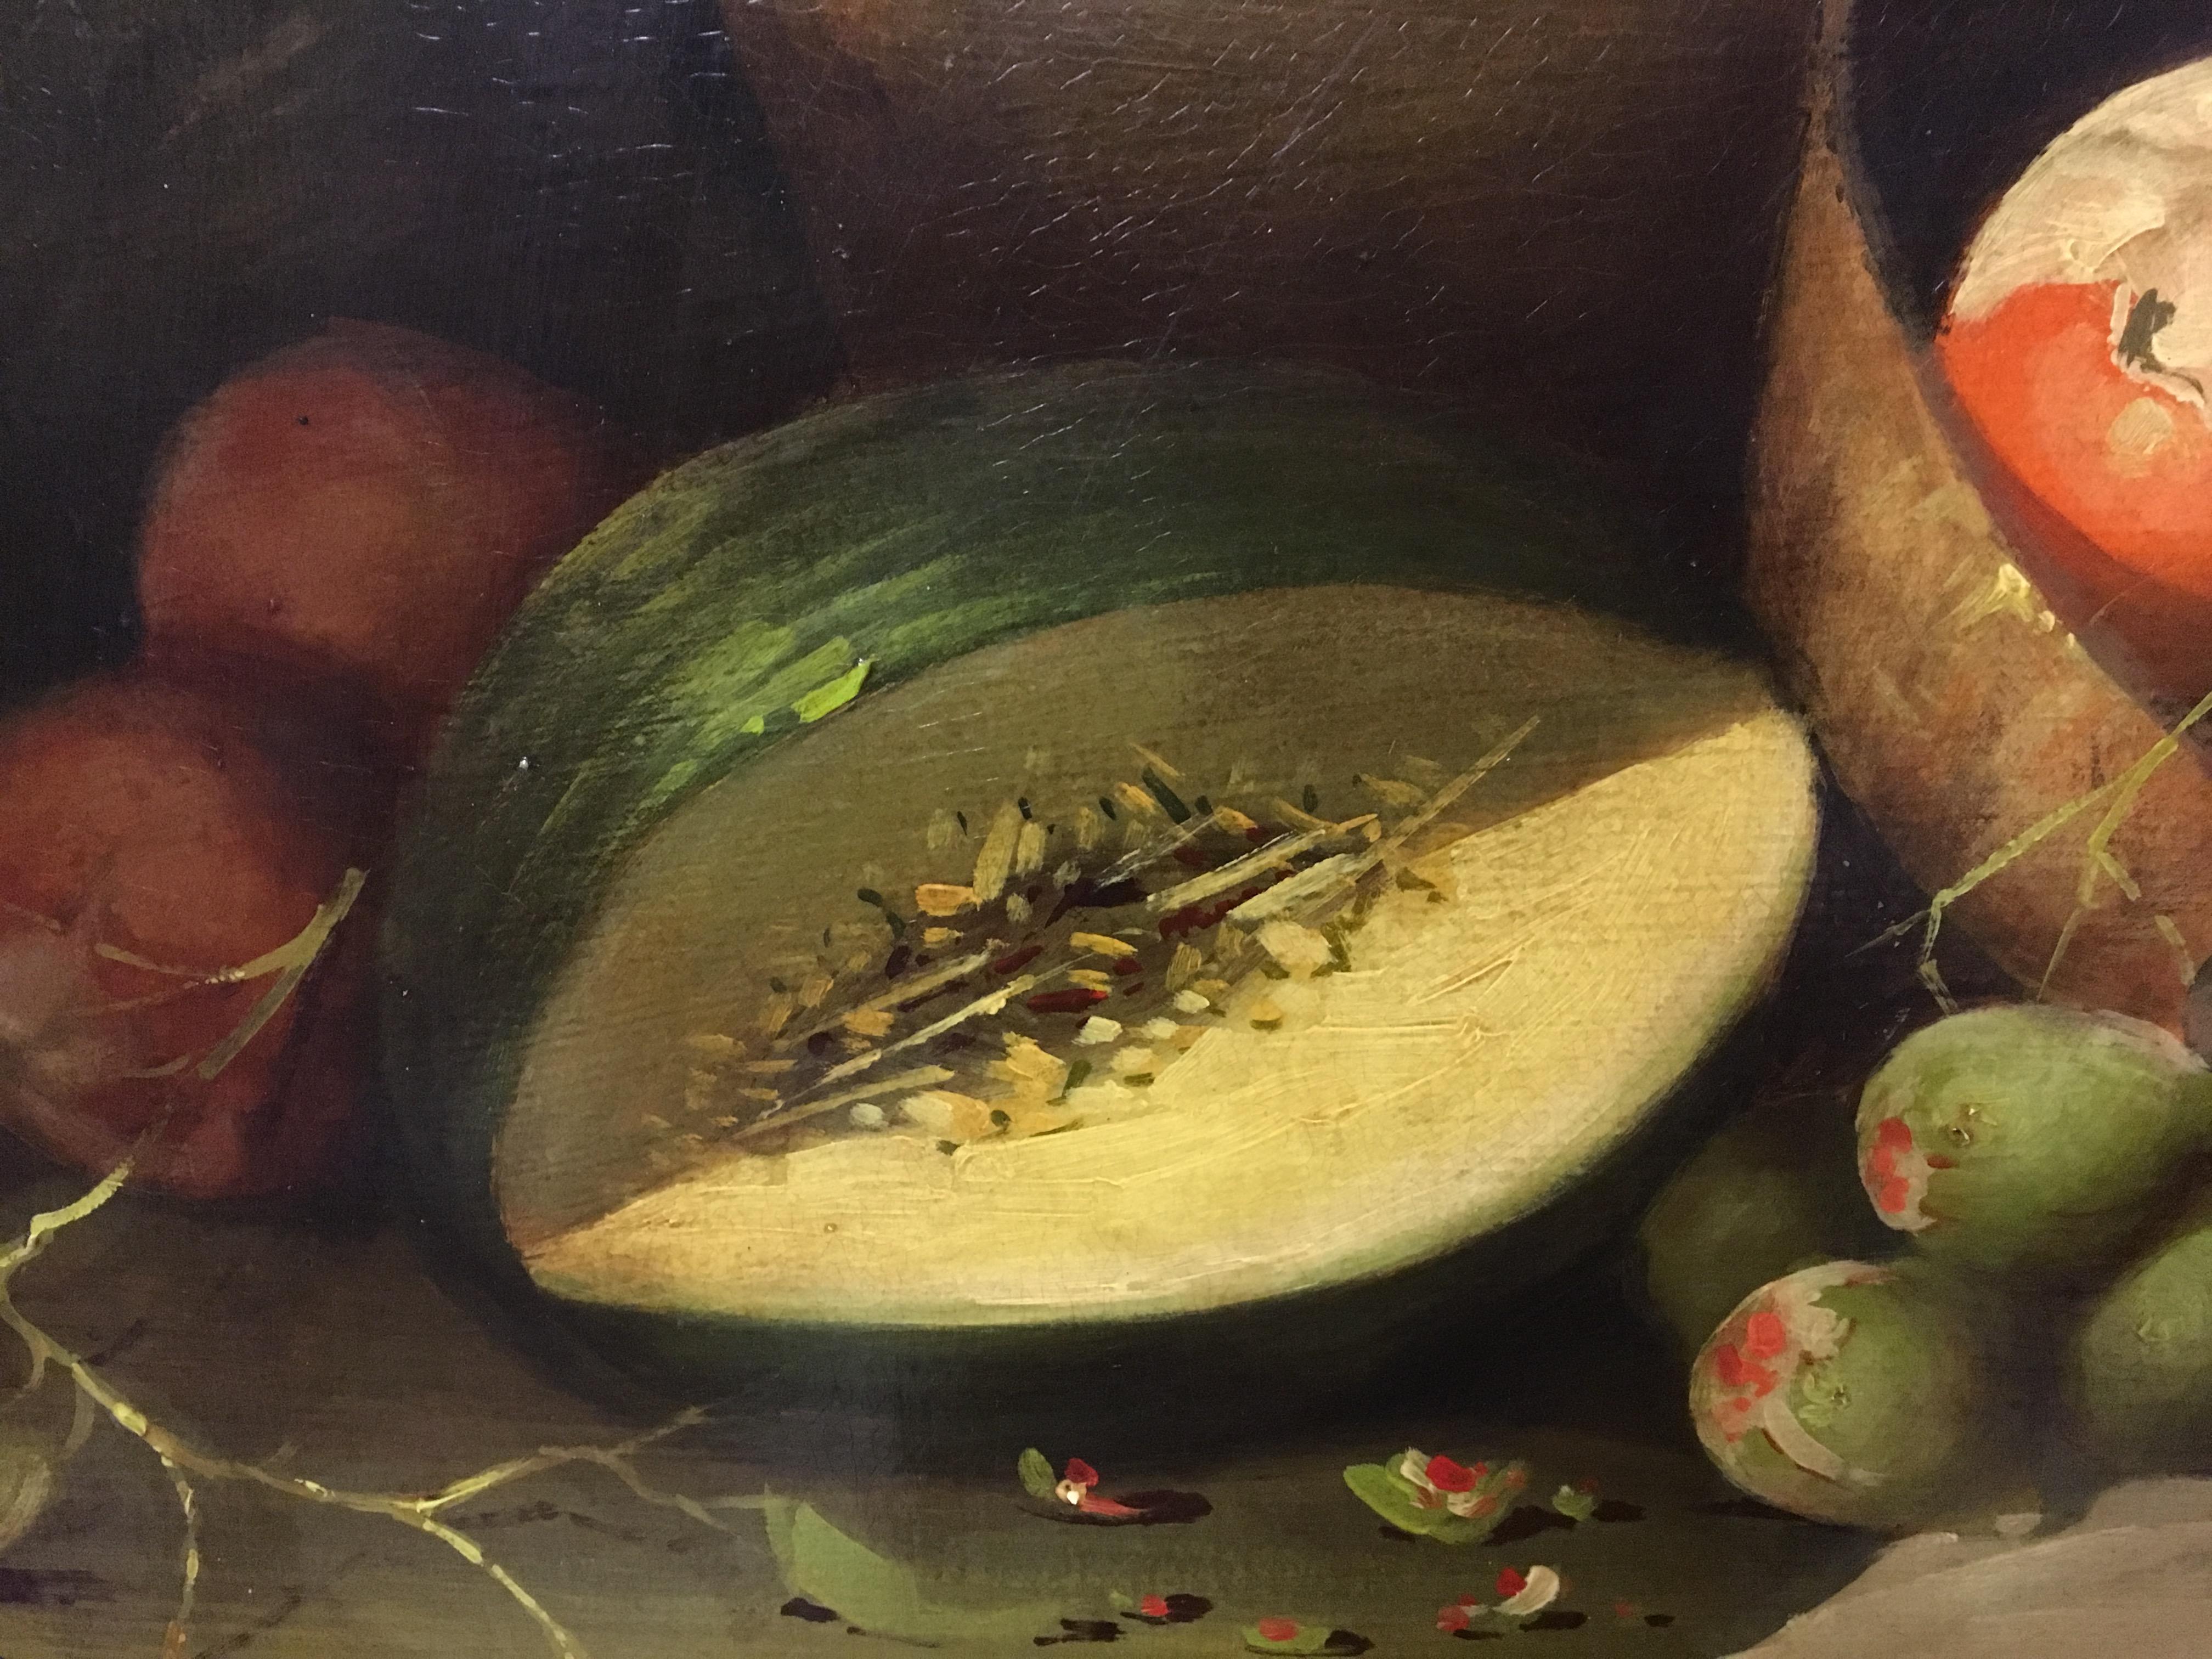 Still life Antonio Celli Italia 2002 Oil on canvas cm. 80x100
n this precious oil on canvas, Antonio Celli is inspired by the paintings of the Neapolitan school of the 17th century, which had as one of the greatest exponents of still life the Master